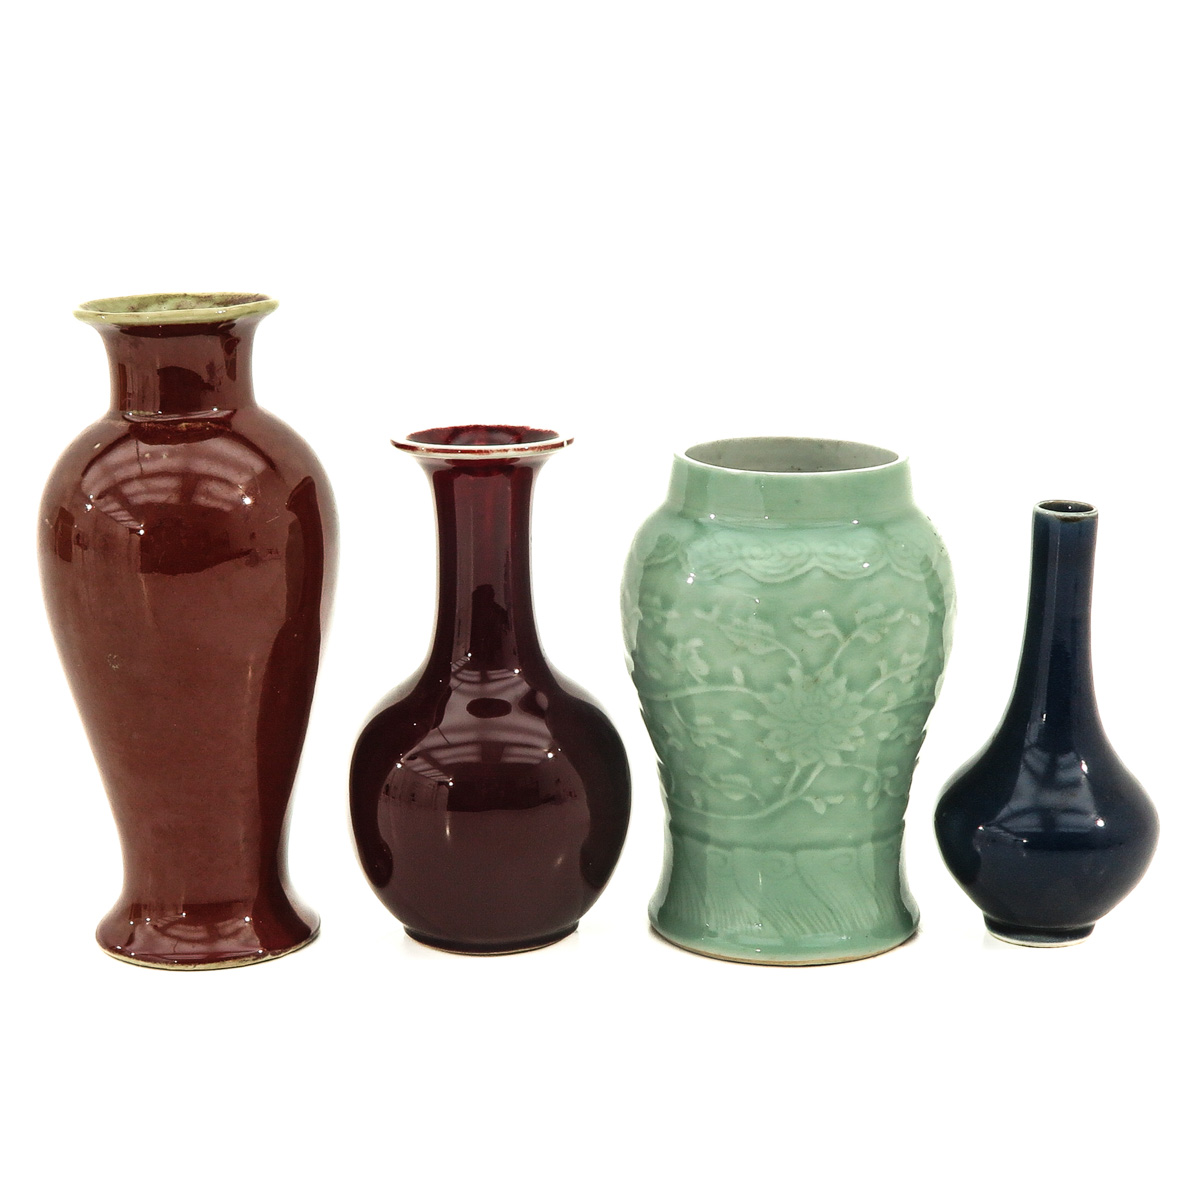 A Collection of 4 Monochrome Decor Vases